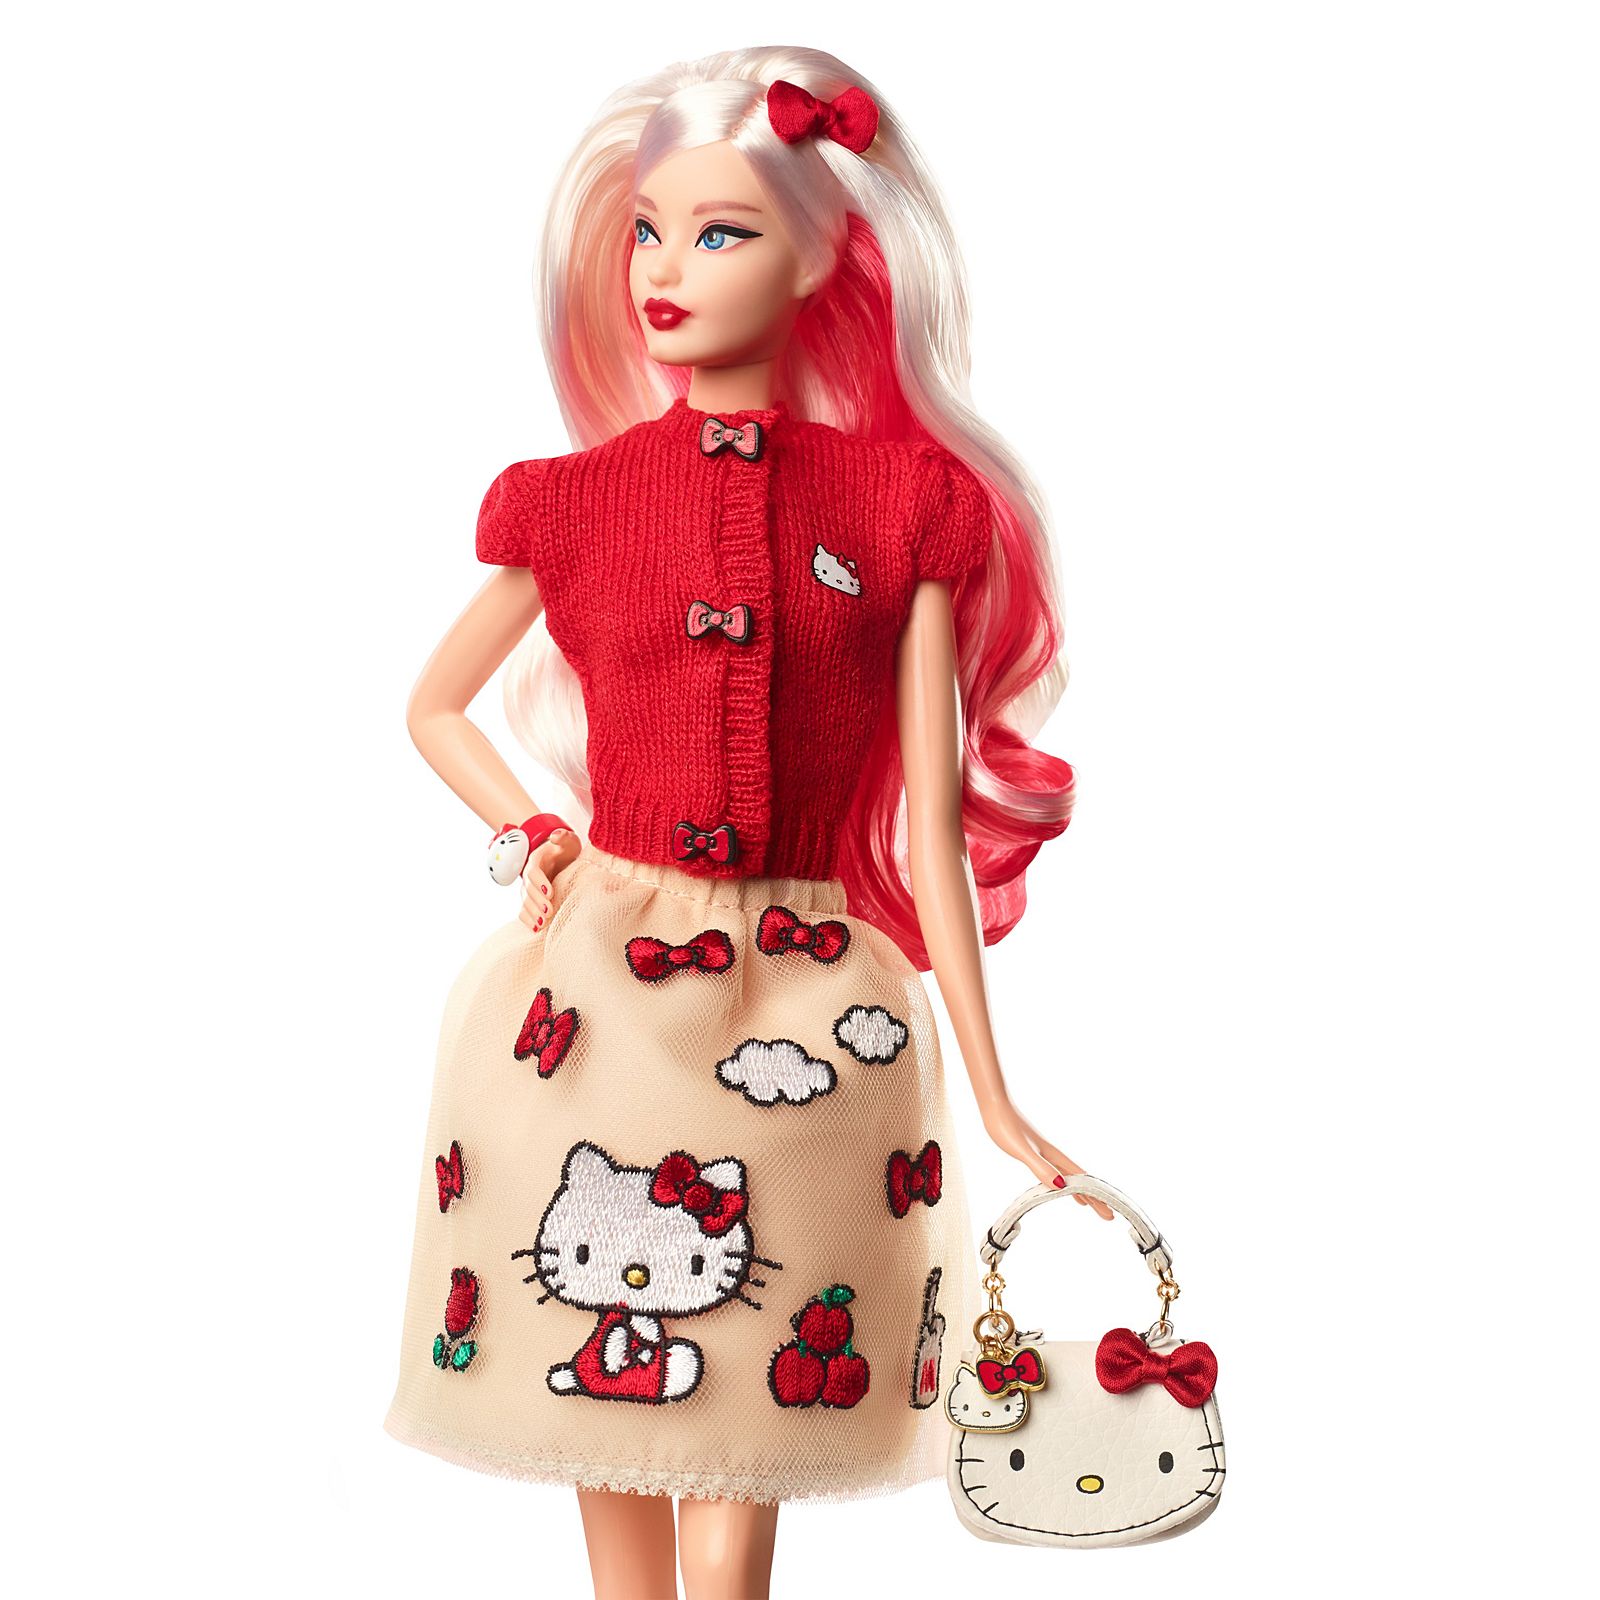 Barbie Hello Kitty Doll - Perfectory Barbie Edition ...